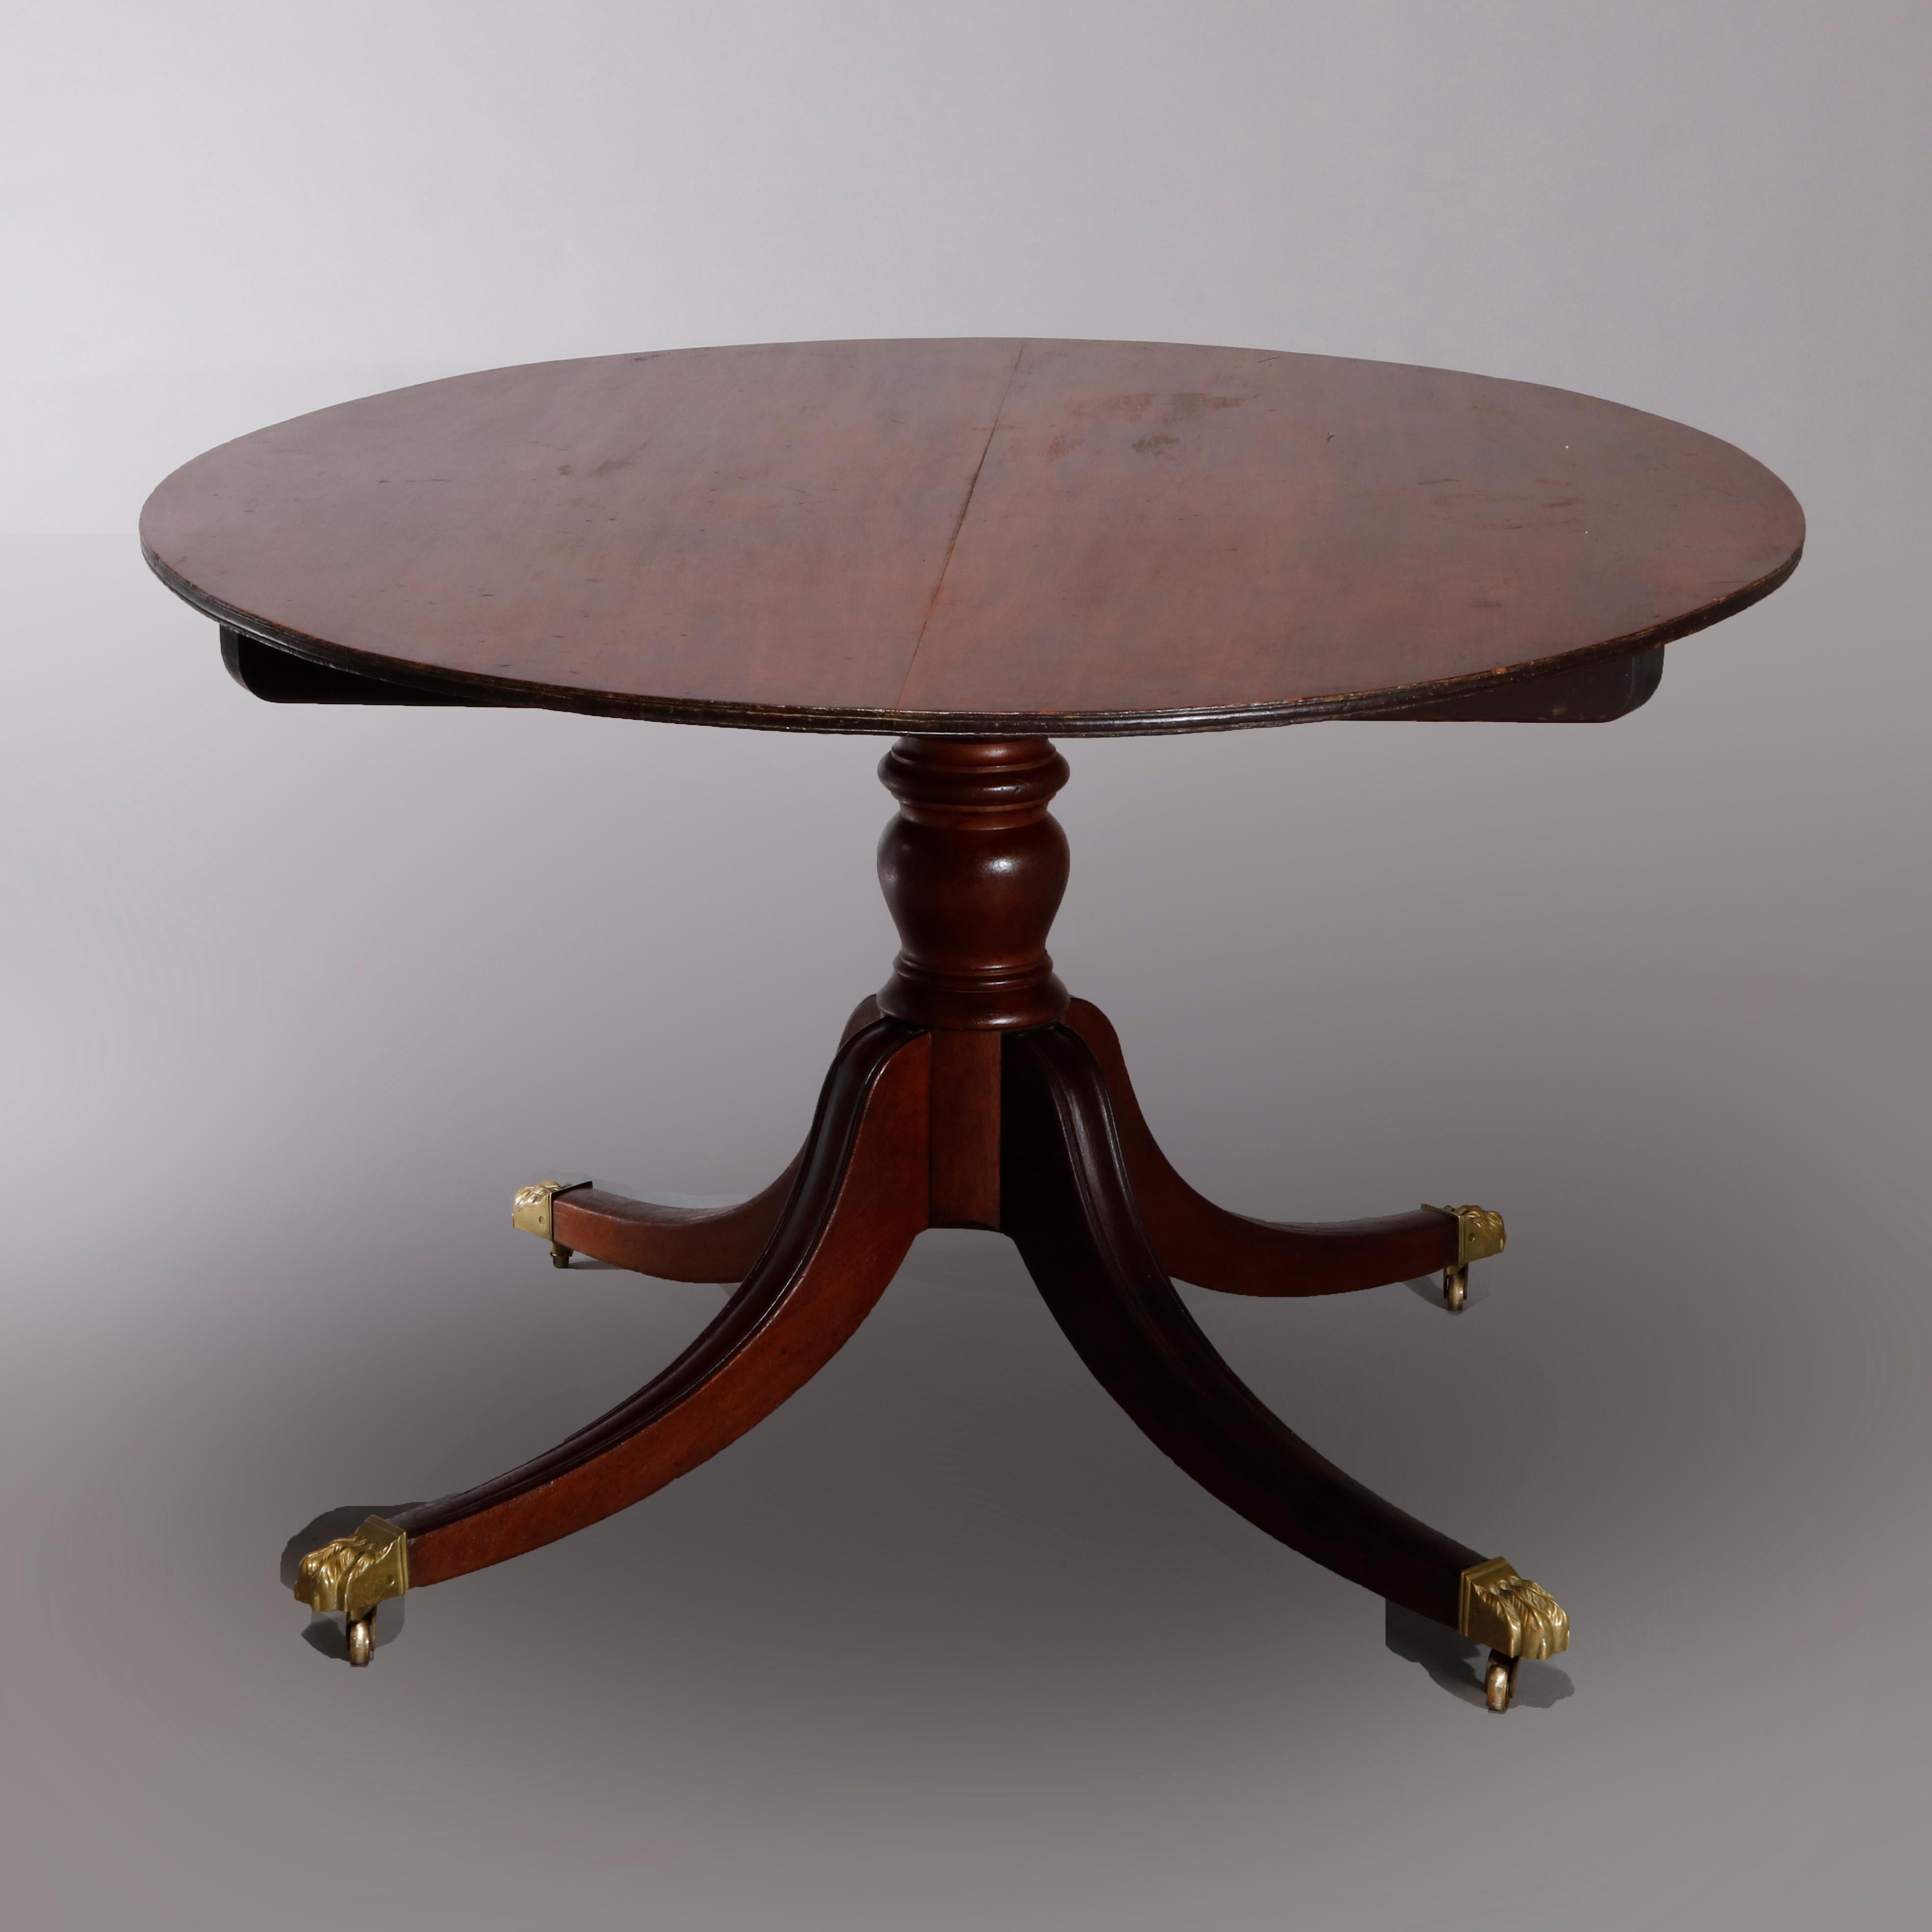 An antique English Regency oversized tilt-top table offers mahogany construction with oval top surmounting turned column pedestal raised on convex legs terminating in cast brass paw feet, circa 1830.

Measures: 27.75